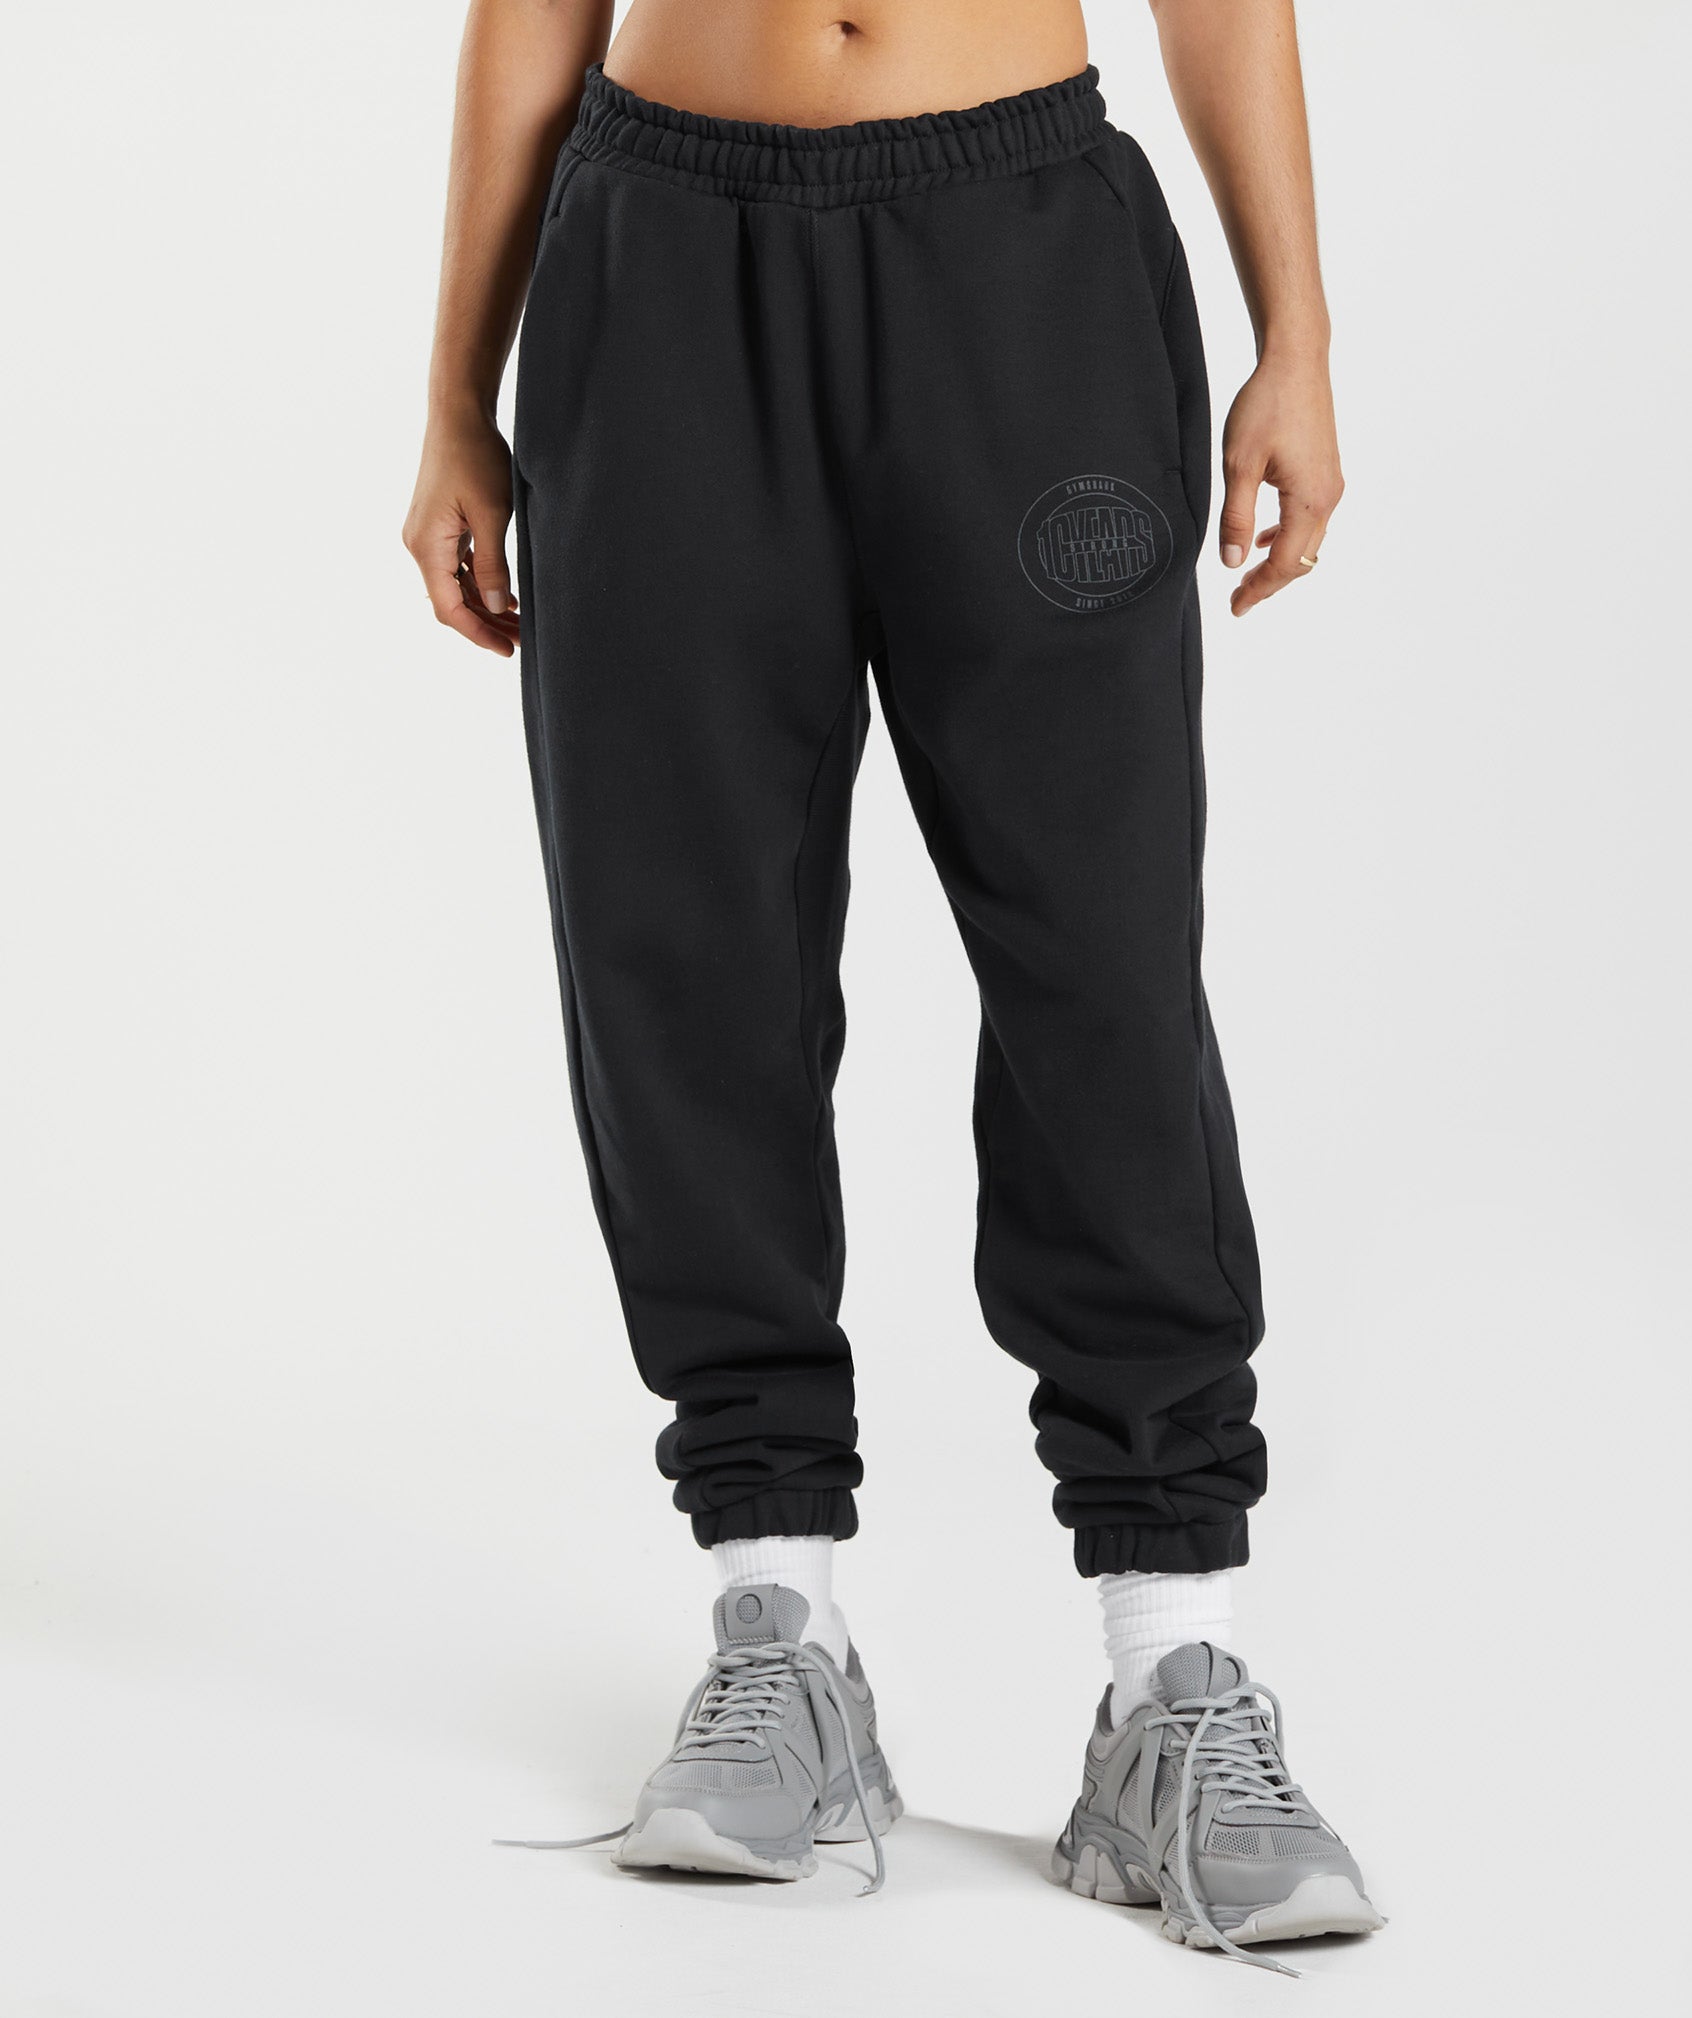 GS10 Year Joggers in Black - view 1